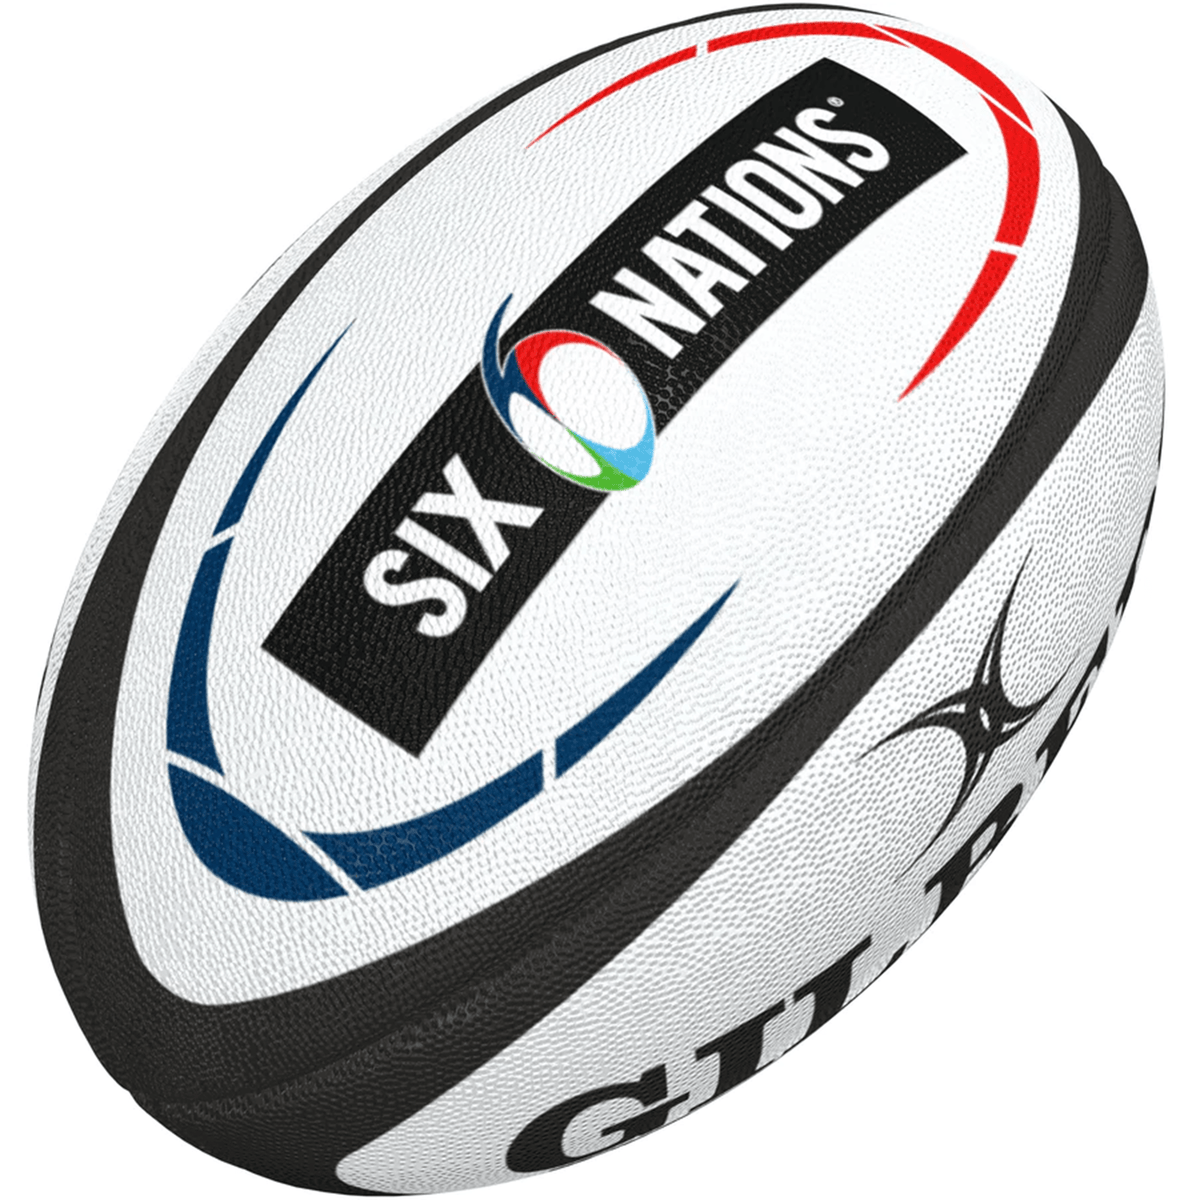 Guinness Six Nations Replica Rugby Ball by Gilbert | World Rugby Shop